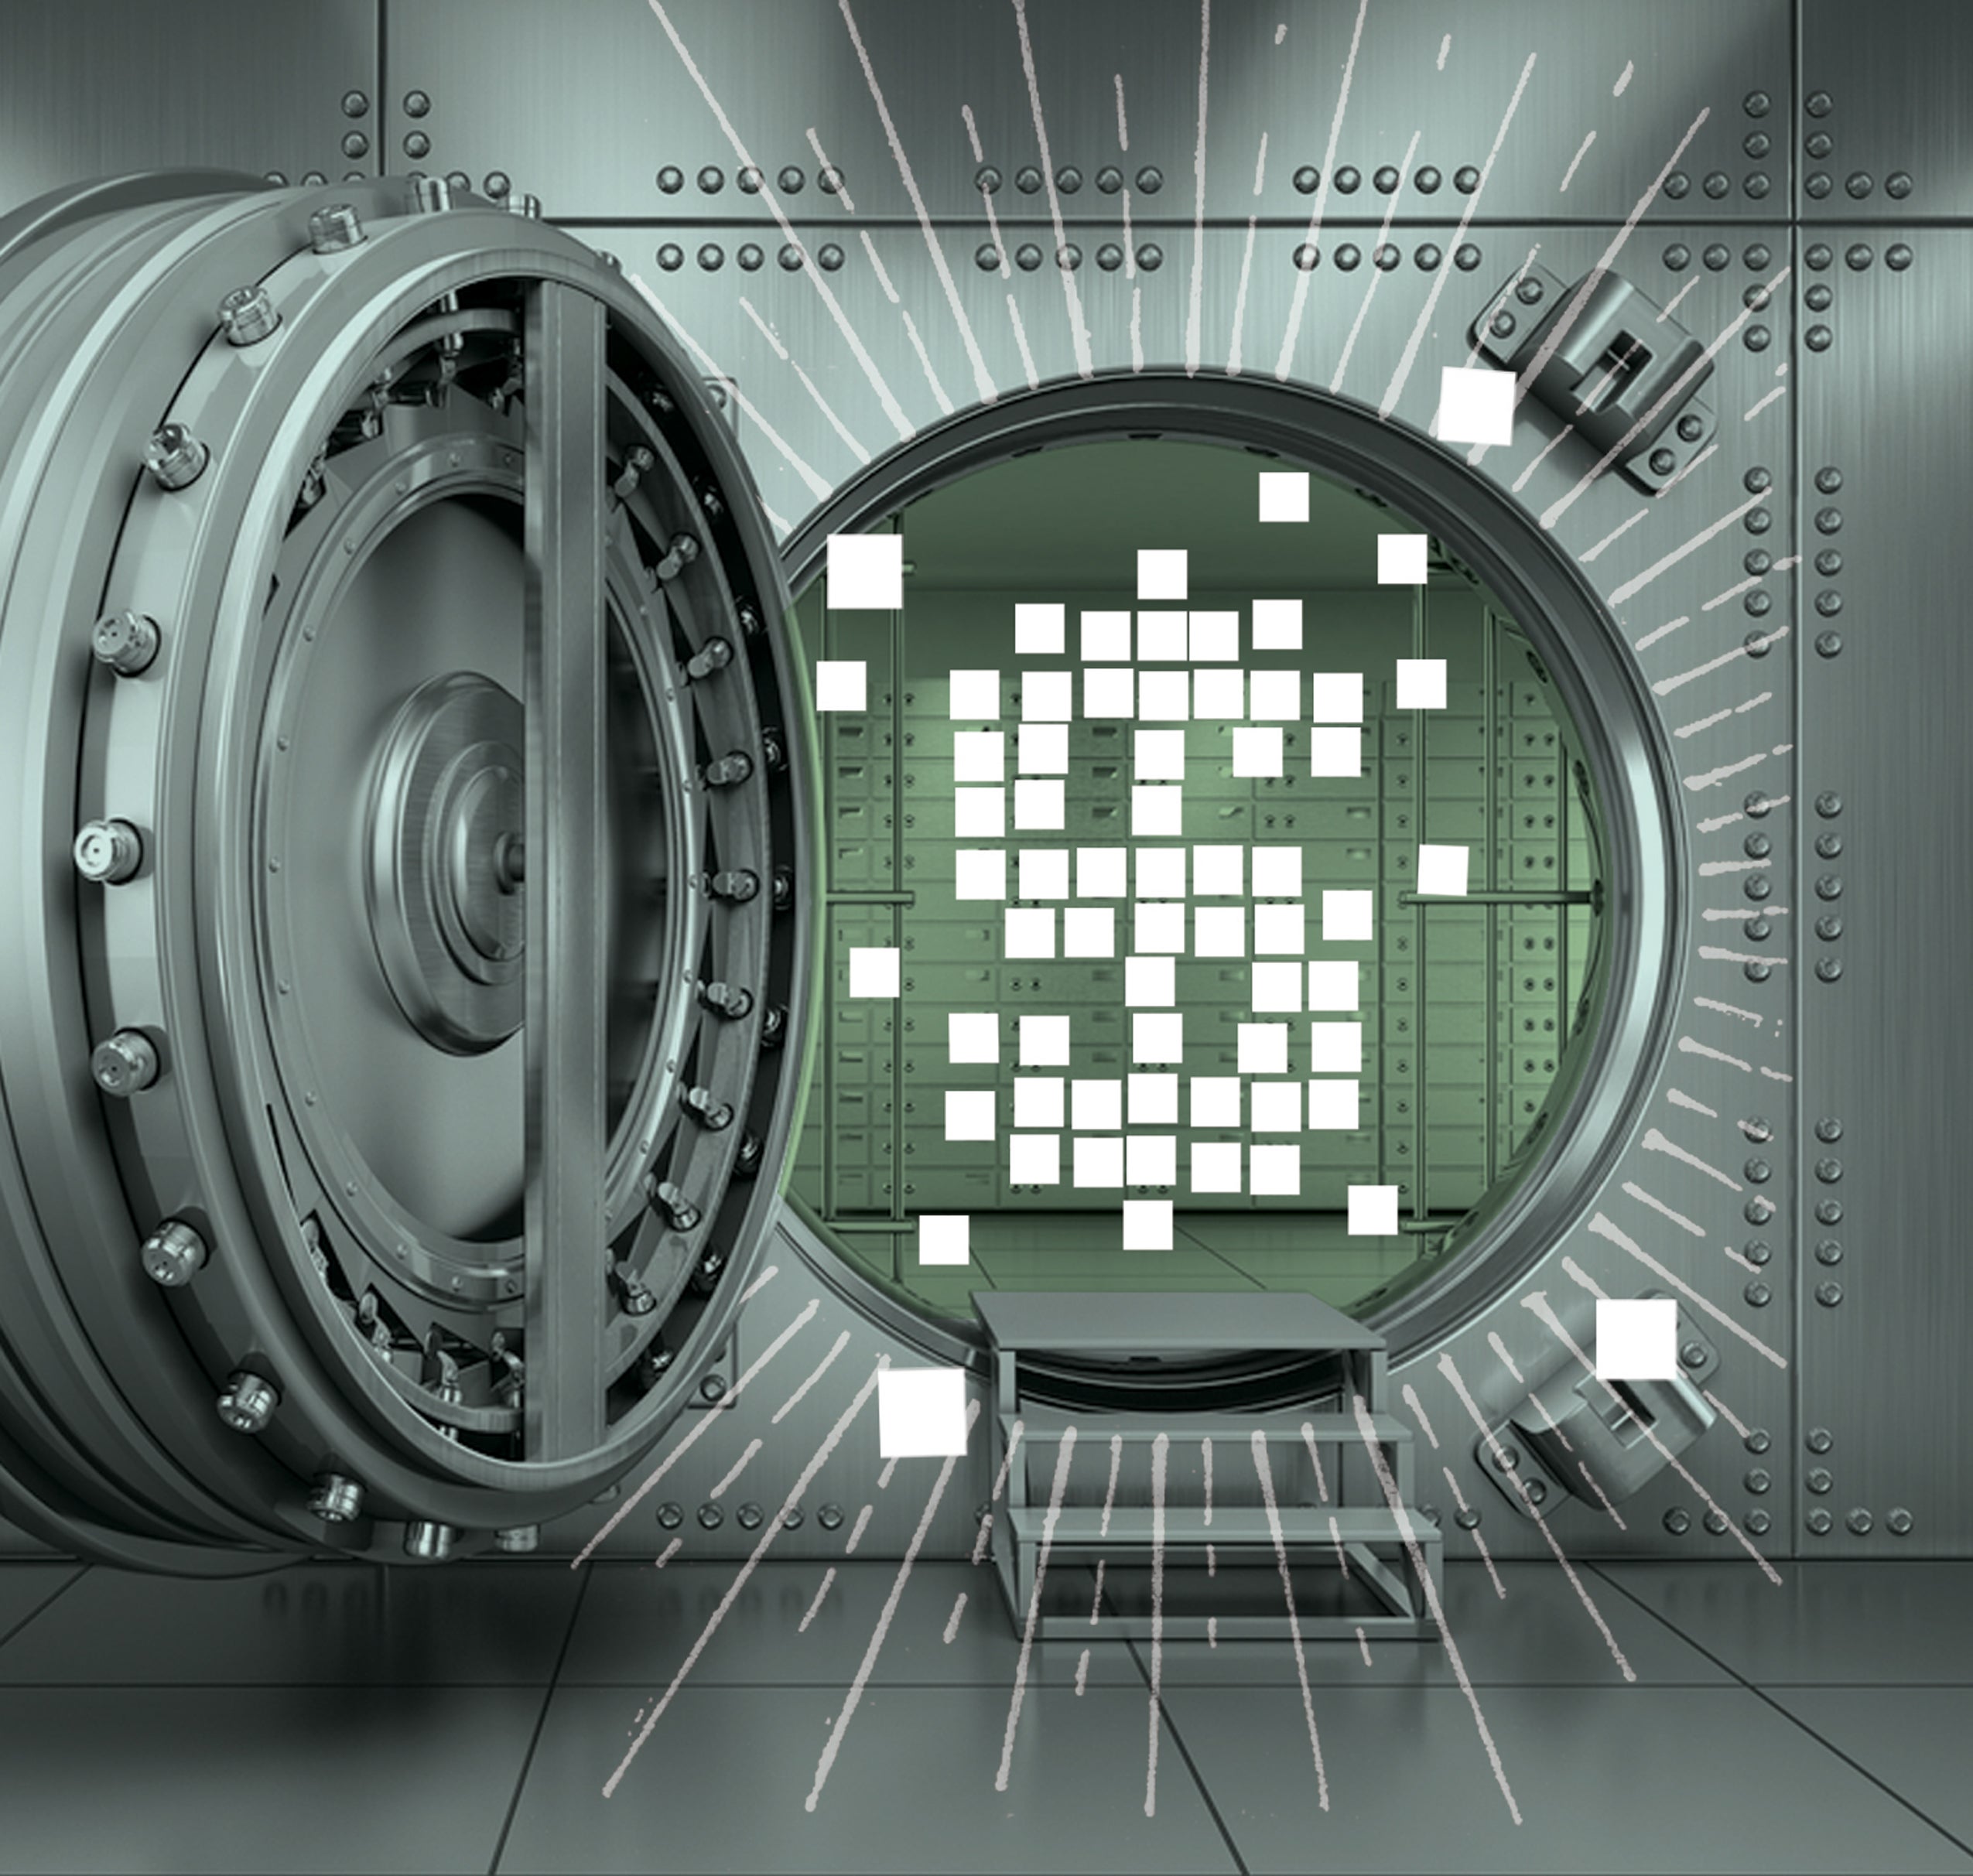 An illustration of an open bank vault with digital currency inside represented by small white squares